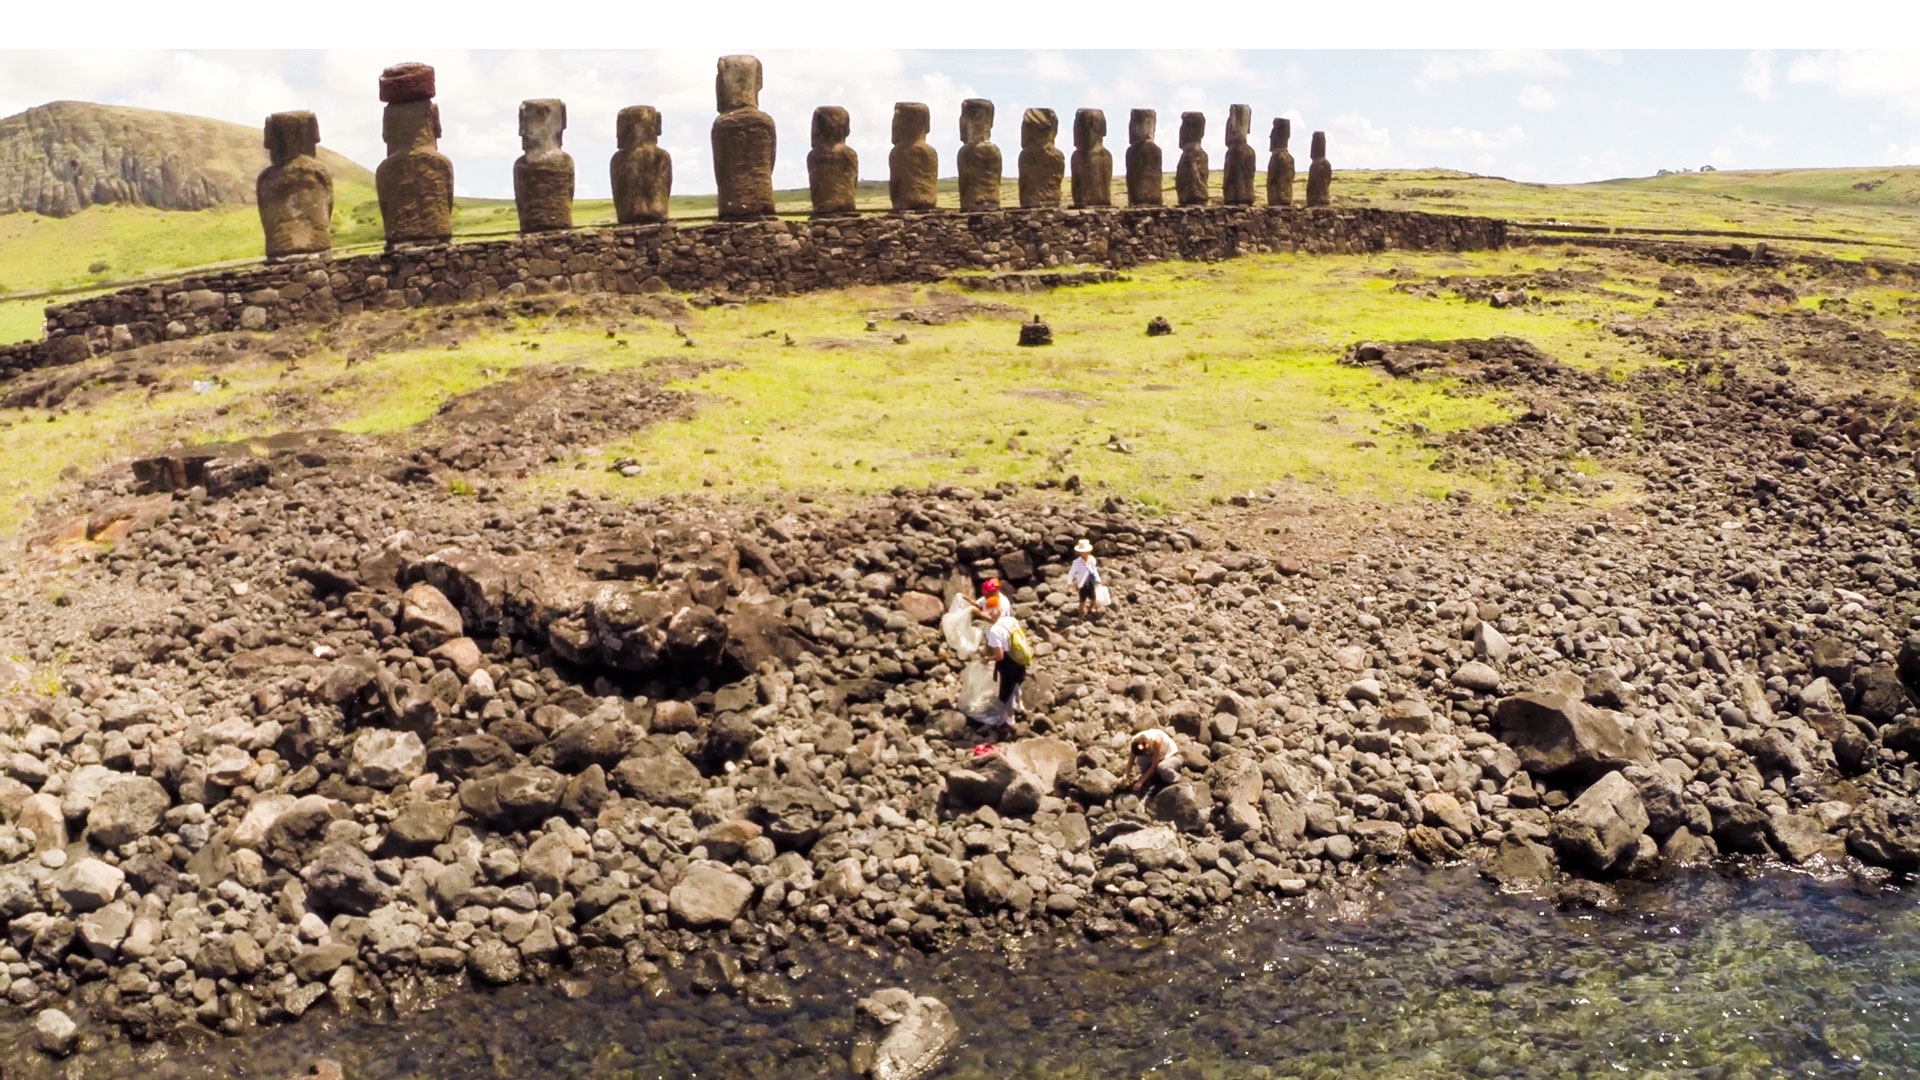 Beach cleanup under way on Rapa Nui while the famous statues loom in background